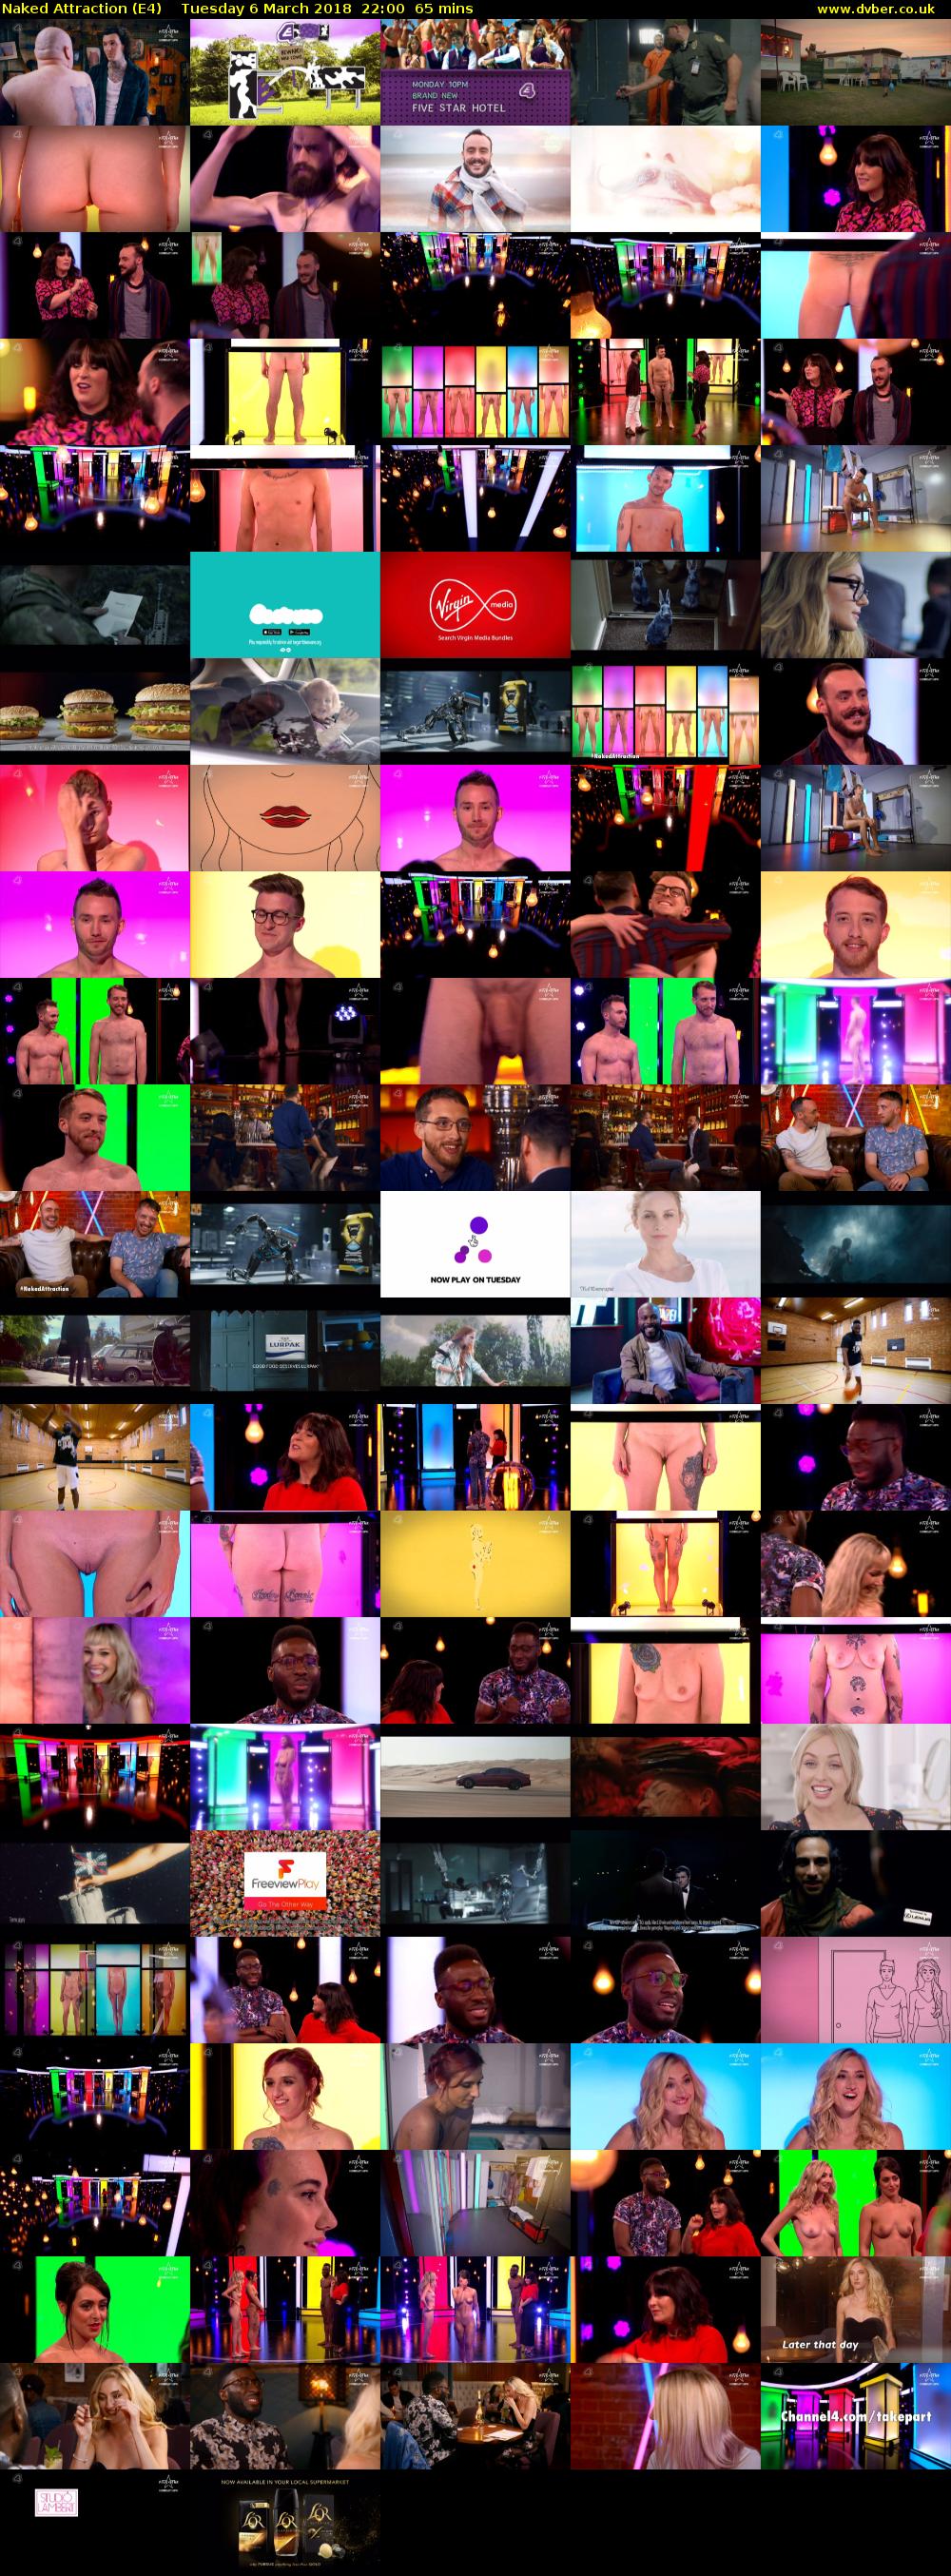 Naked Attraction (E4) Tuesday 6 March 2018 22:00 - 23:05